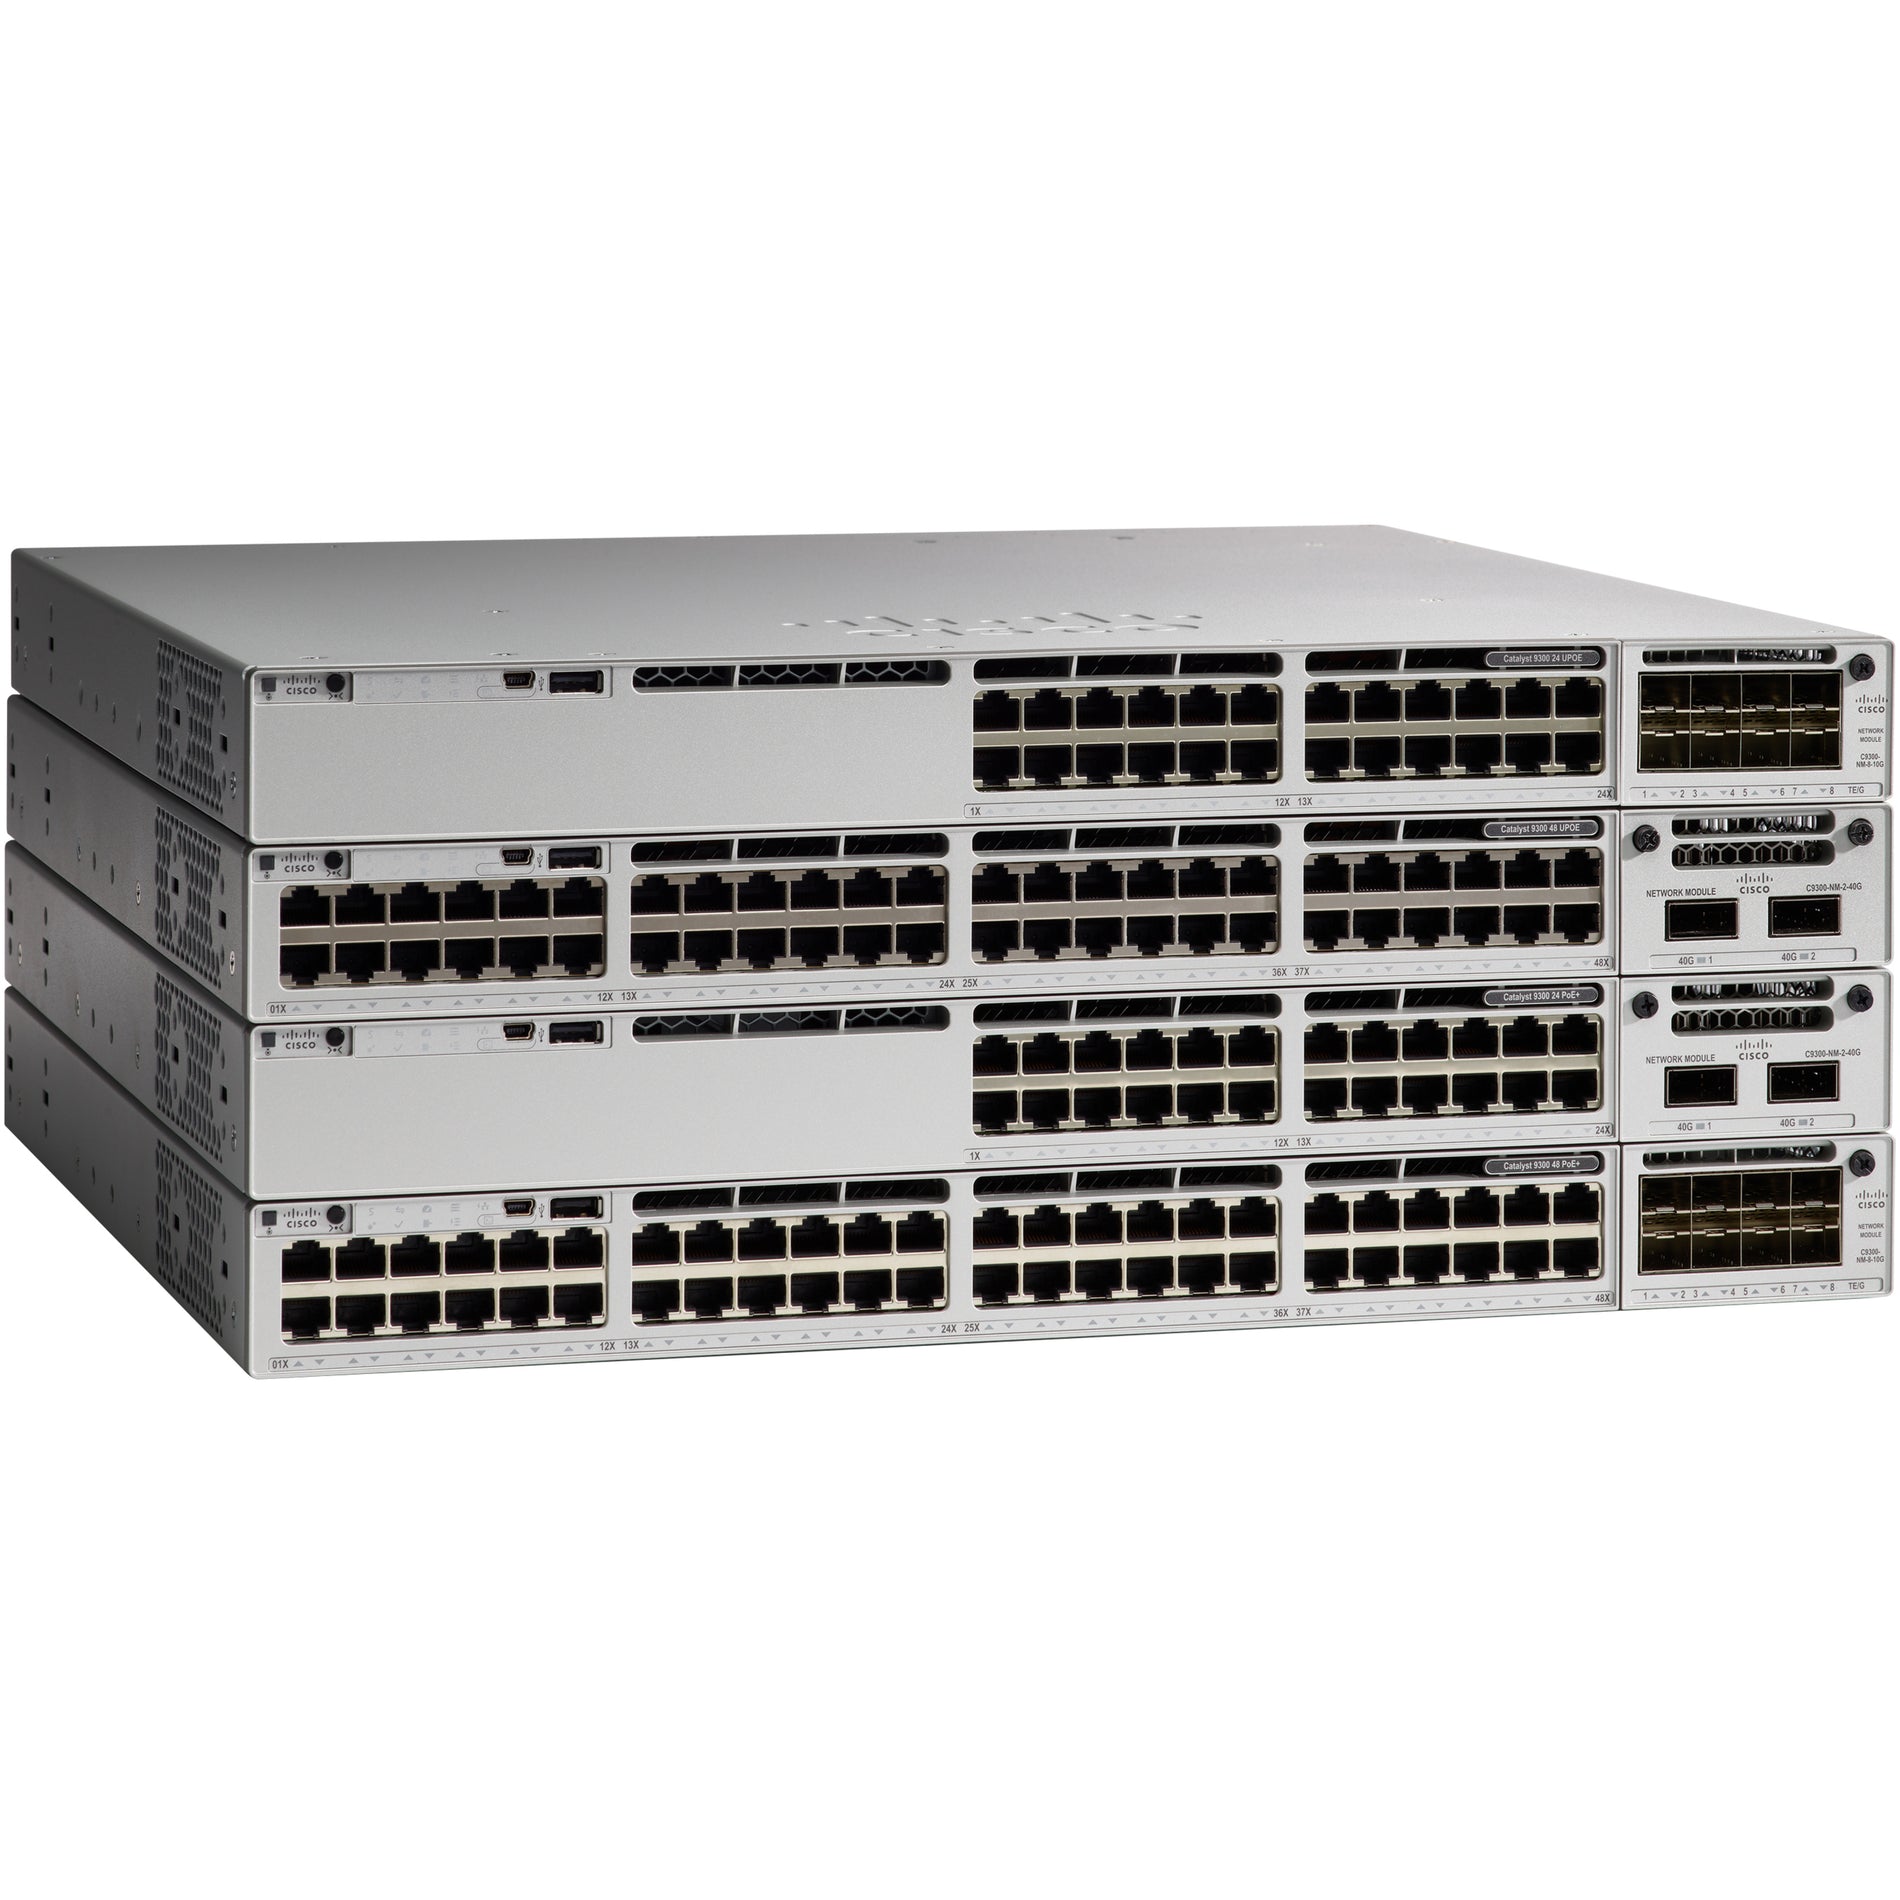 Cisco C9300-48UXM-A Catalyst Ethernet Switch, 48 x Gigabit Ethernet Network, Power Supply, Manageable